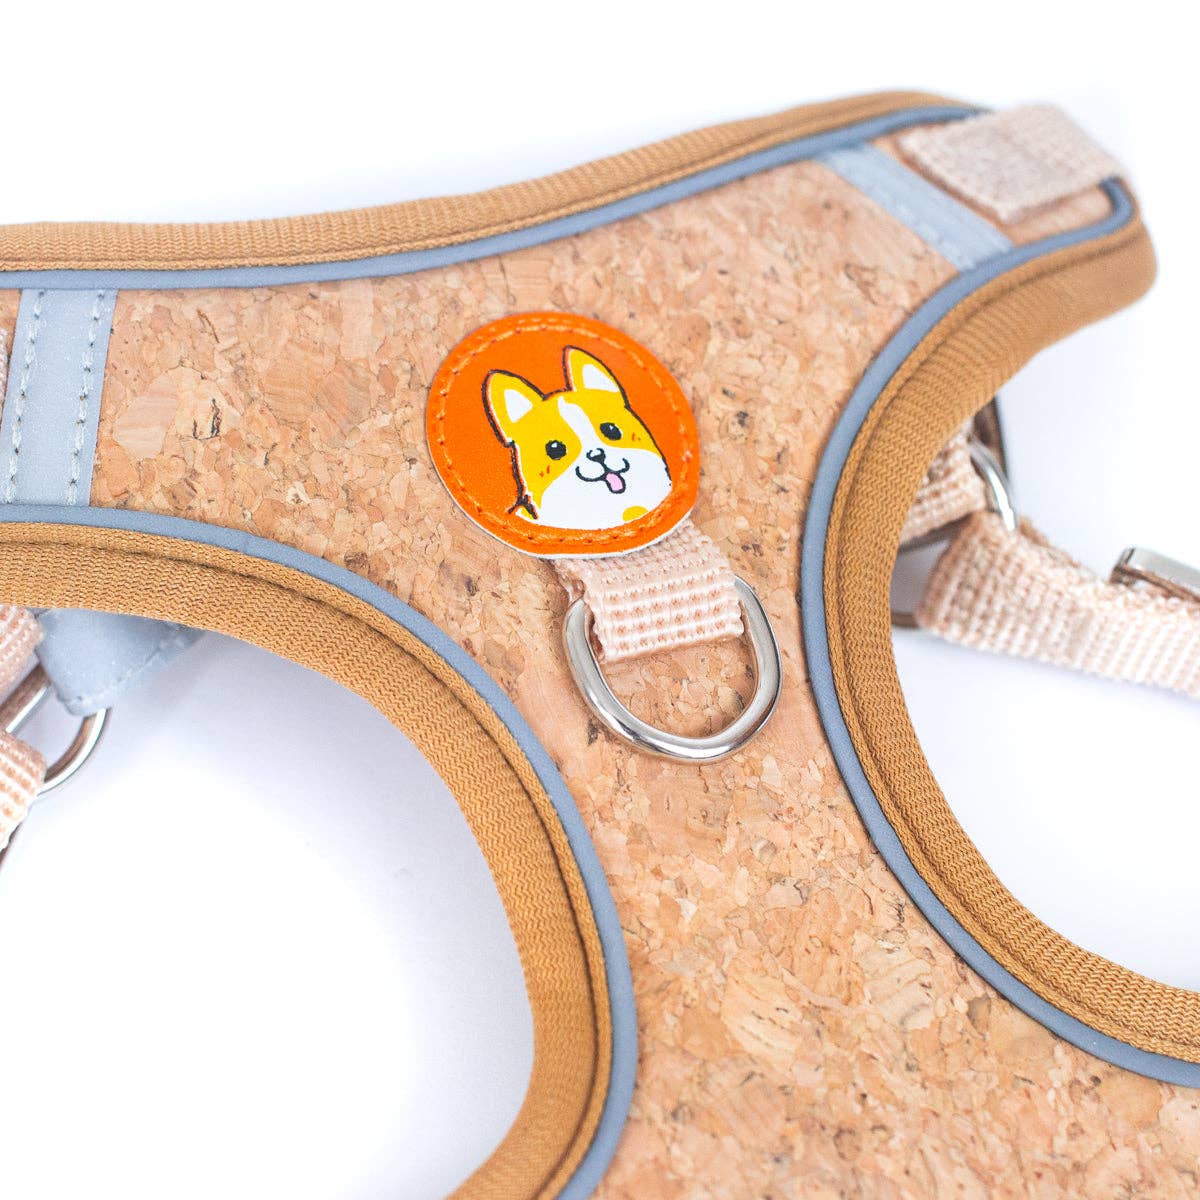 Cork Dog Harness & Leash Set for Small Dogs -Comfortable Ves